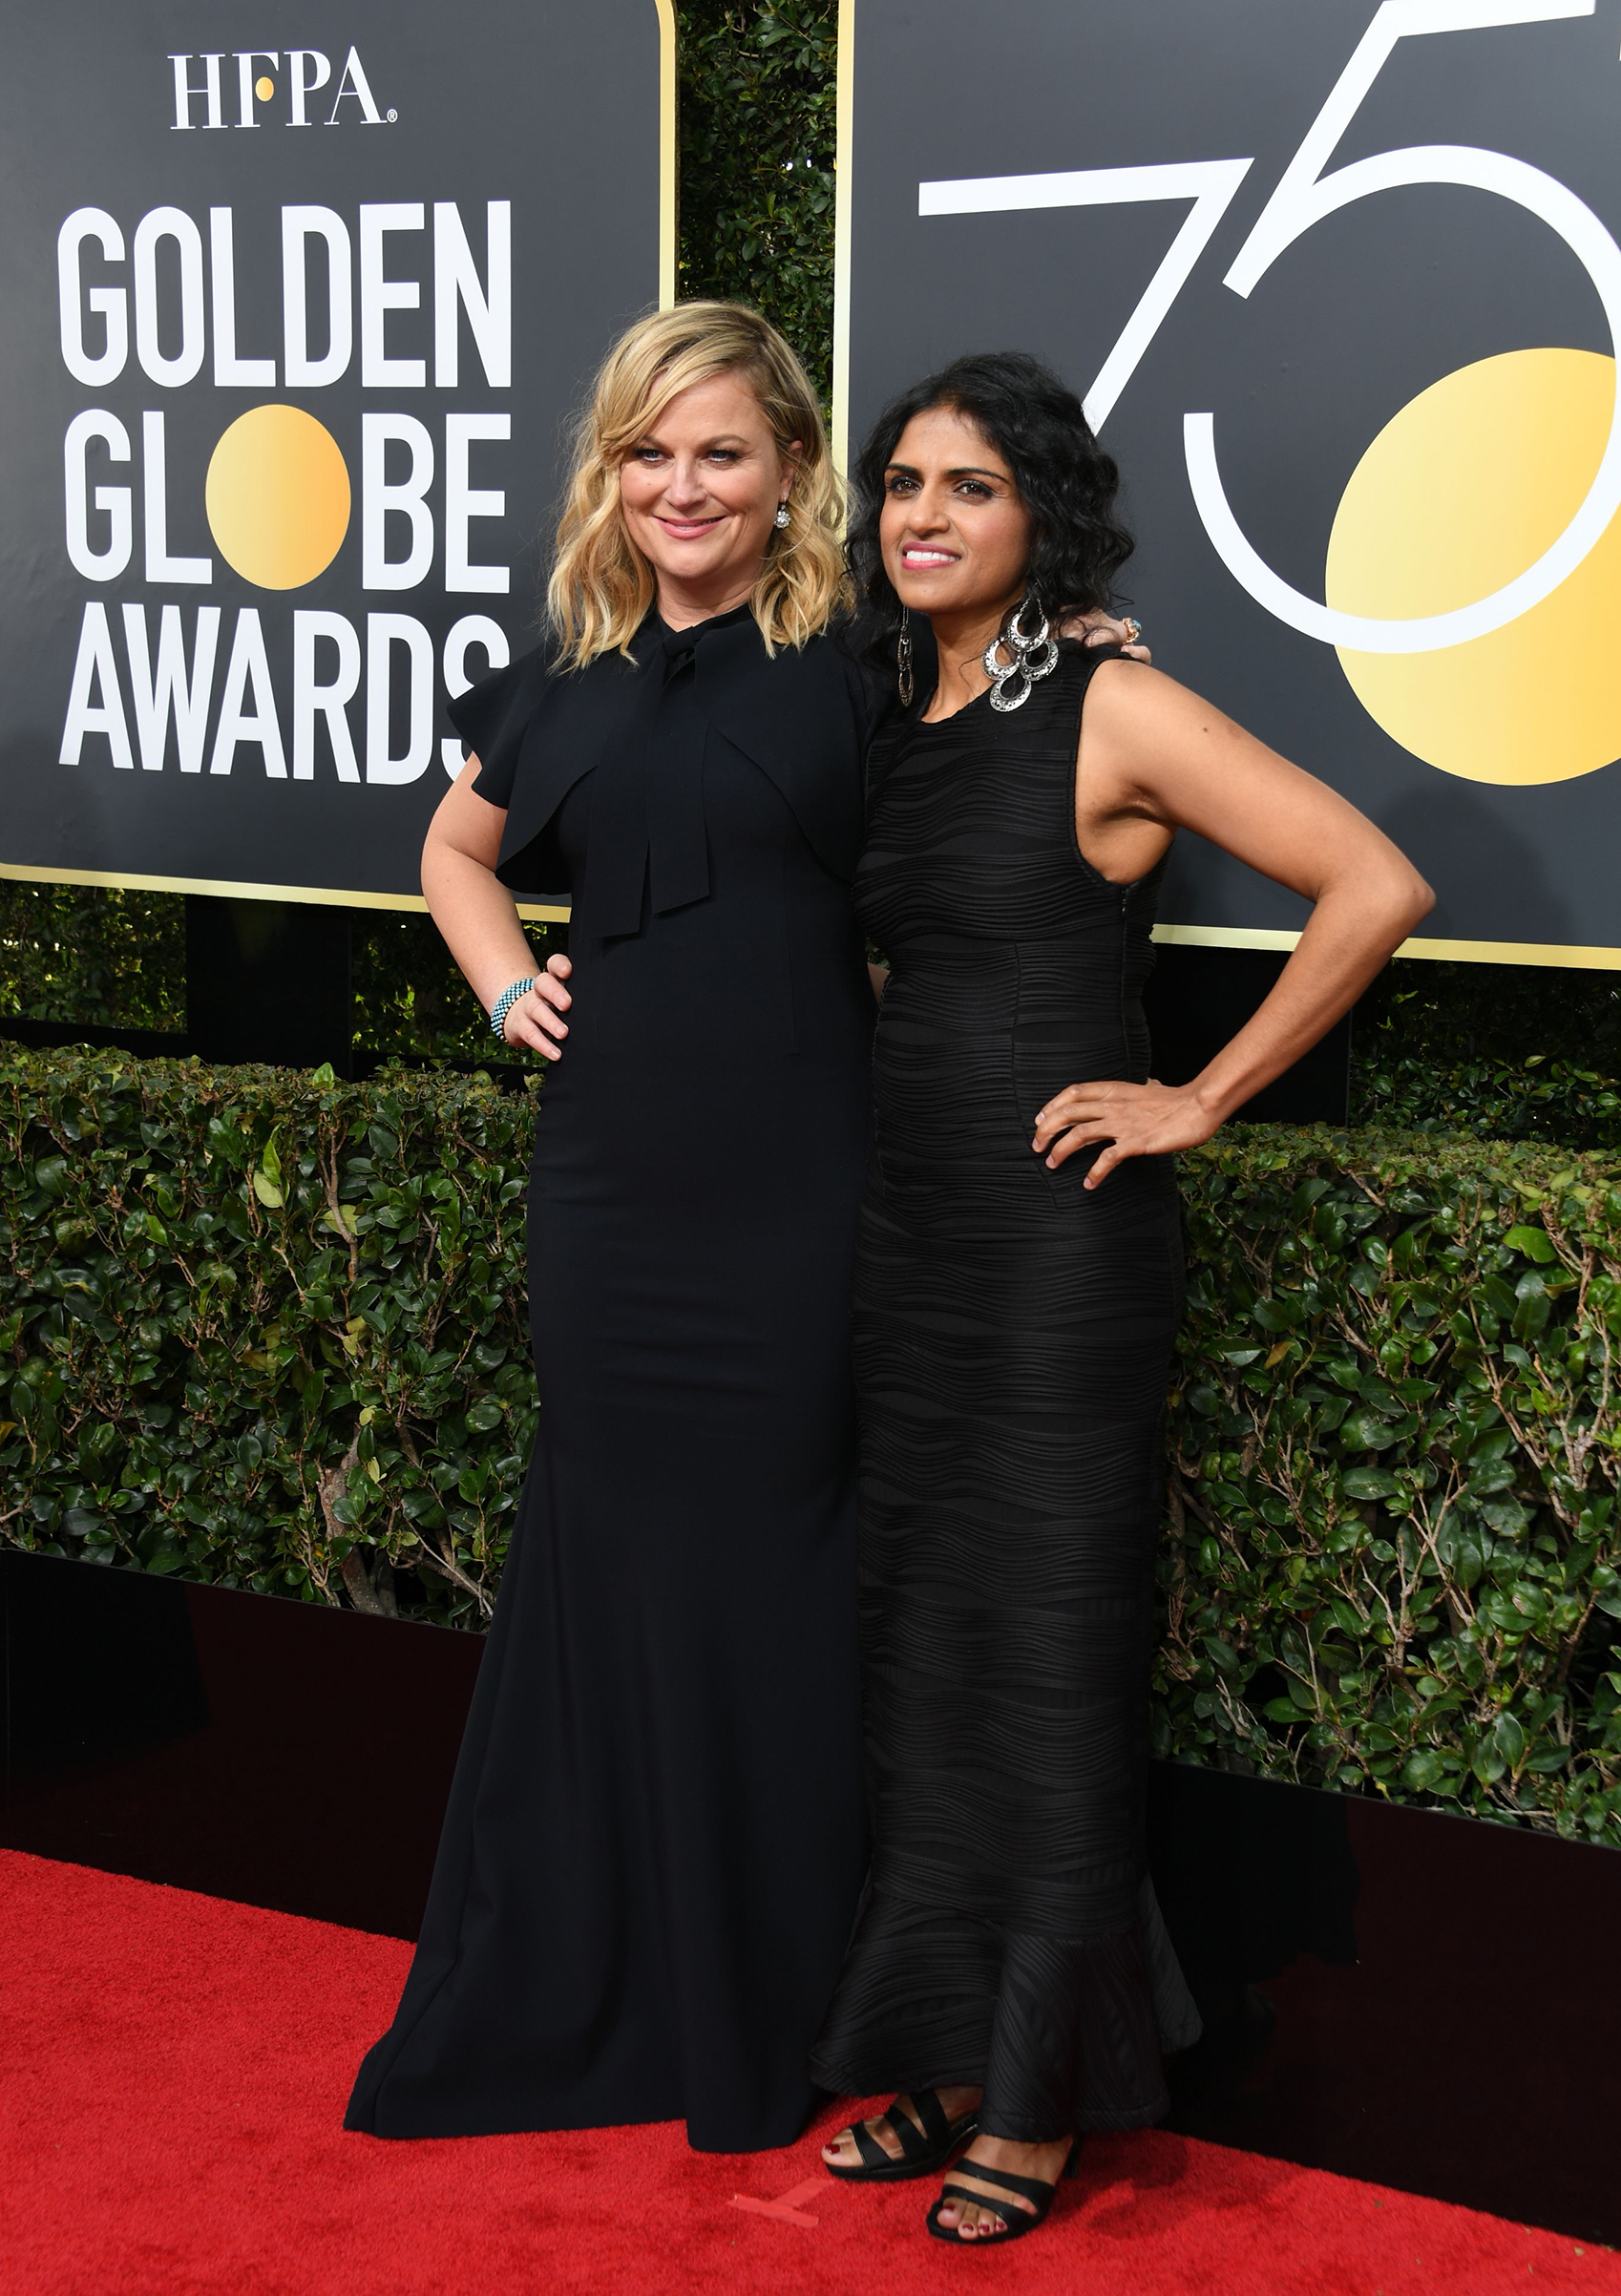 Amy Poehler and Restaurant Opportunities Center United president Saru Jayaraman arrive for the 75th Golden Globe Awards on January 7, 2018, in Beverly Hills, California. (Valerie Macon—AFP/Getty Images)